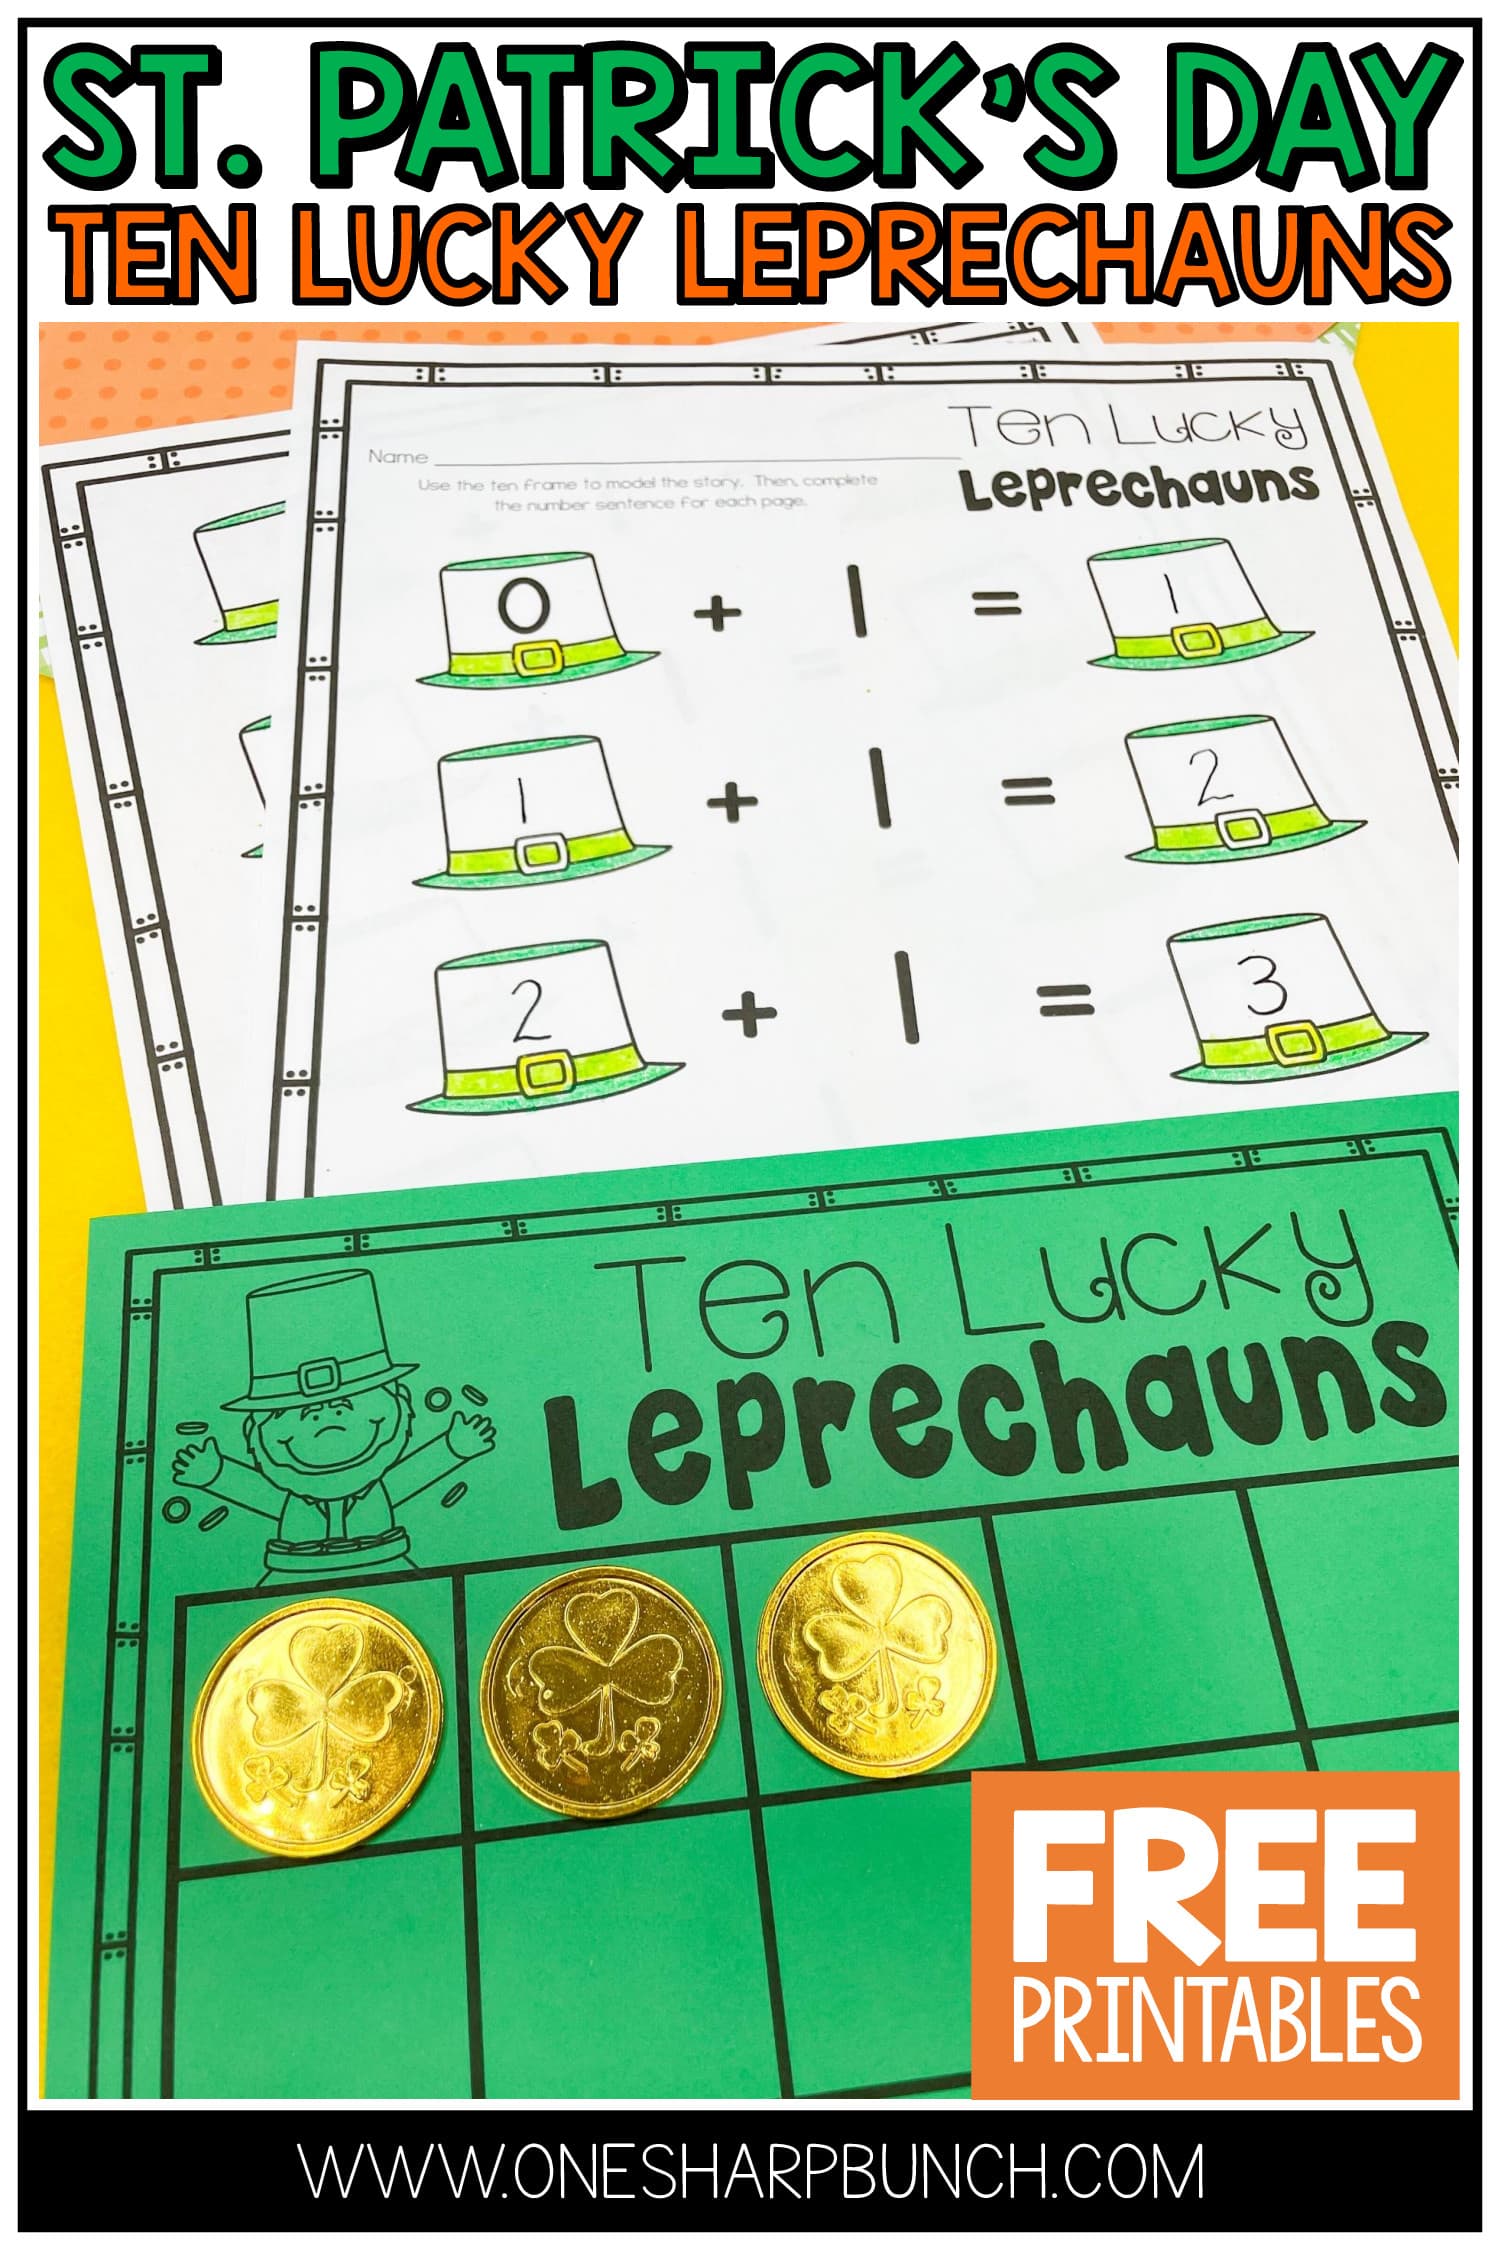 Engaging St. Patrick's Day activities for kids, including St. Patrick's Day books and a FREEBIE perfect for the story Ten Lucky Leprechauns!